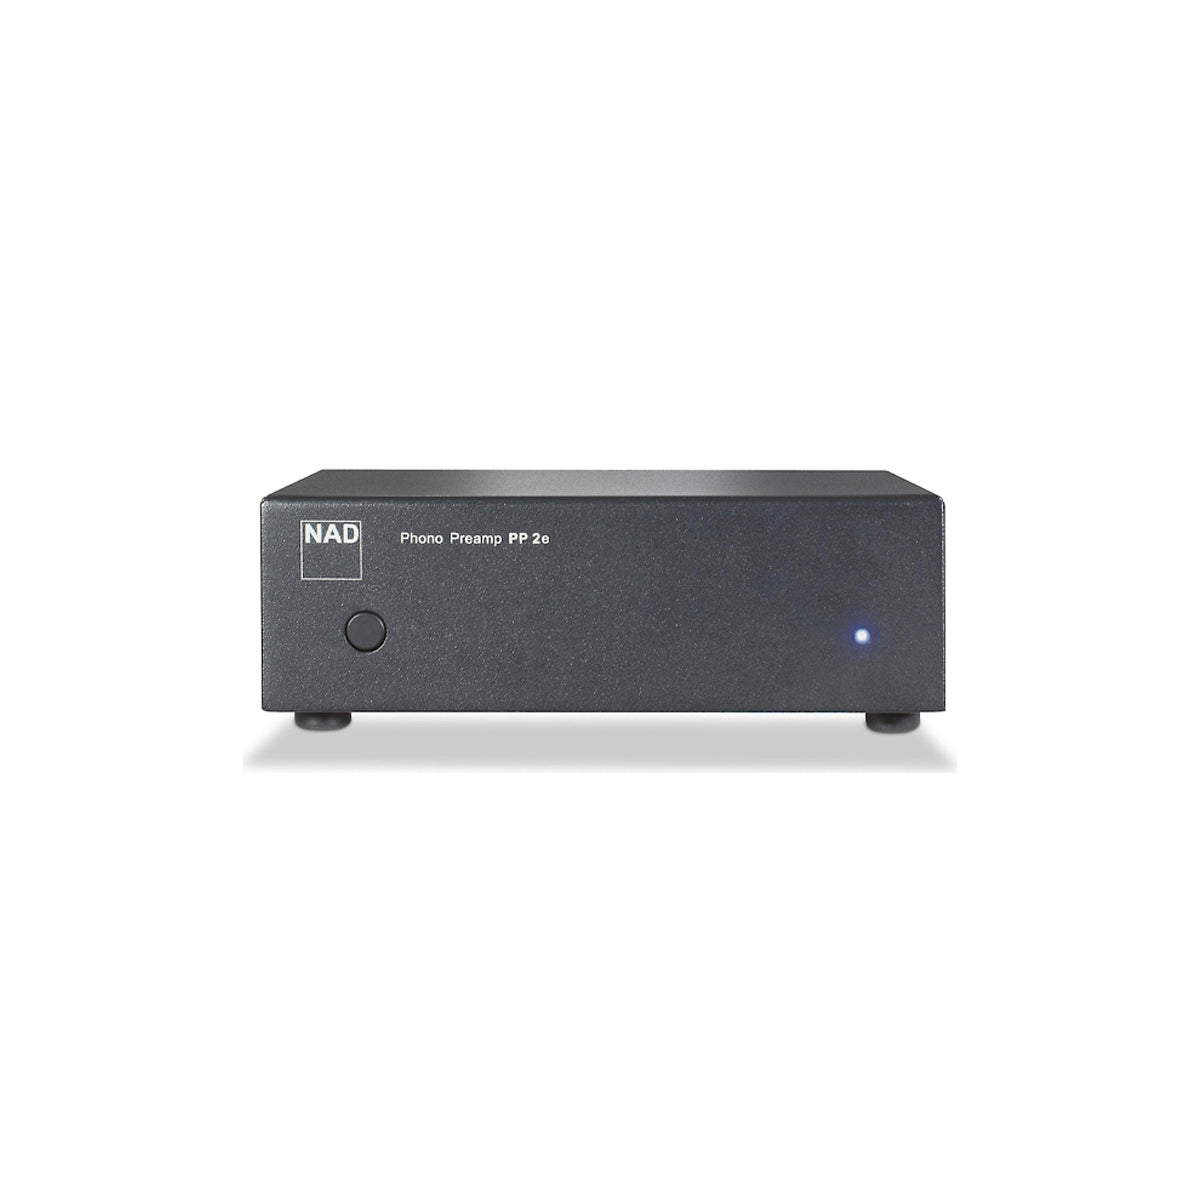 NAD PP 2e Phono Preamplifier - The Audio Experts